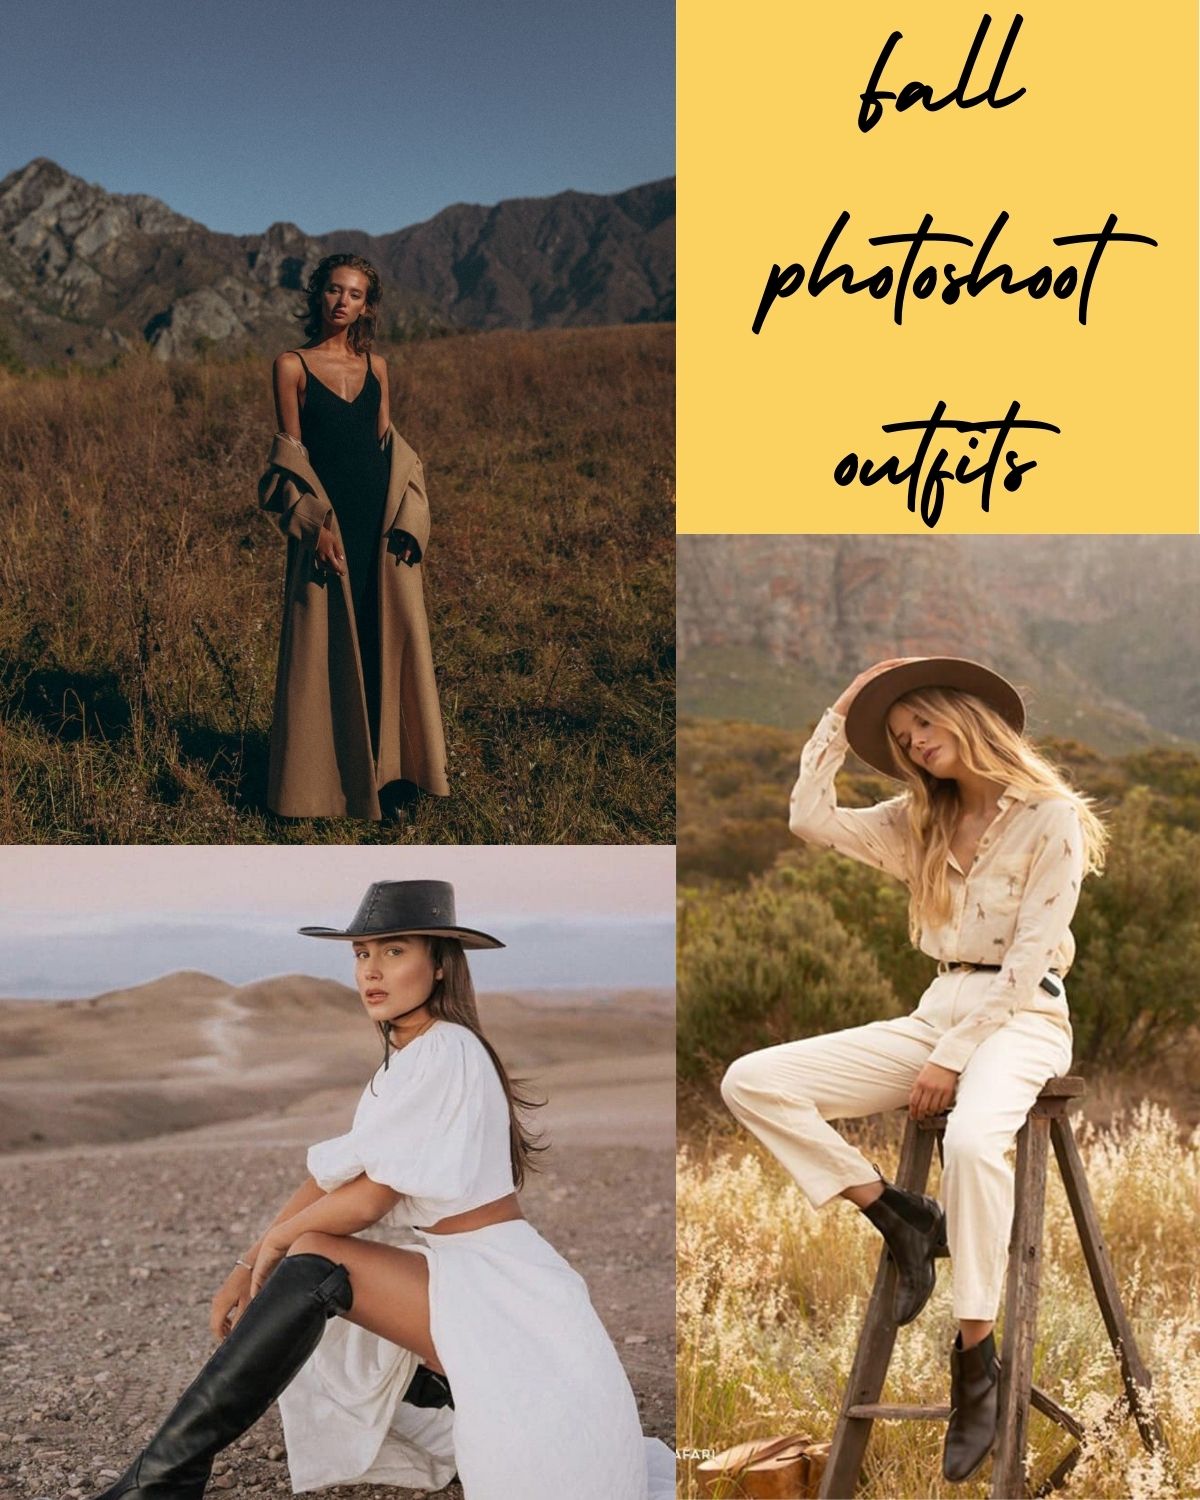 Three stunning fall photoshoots for outfit inspiration